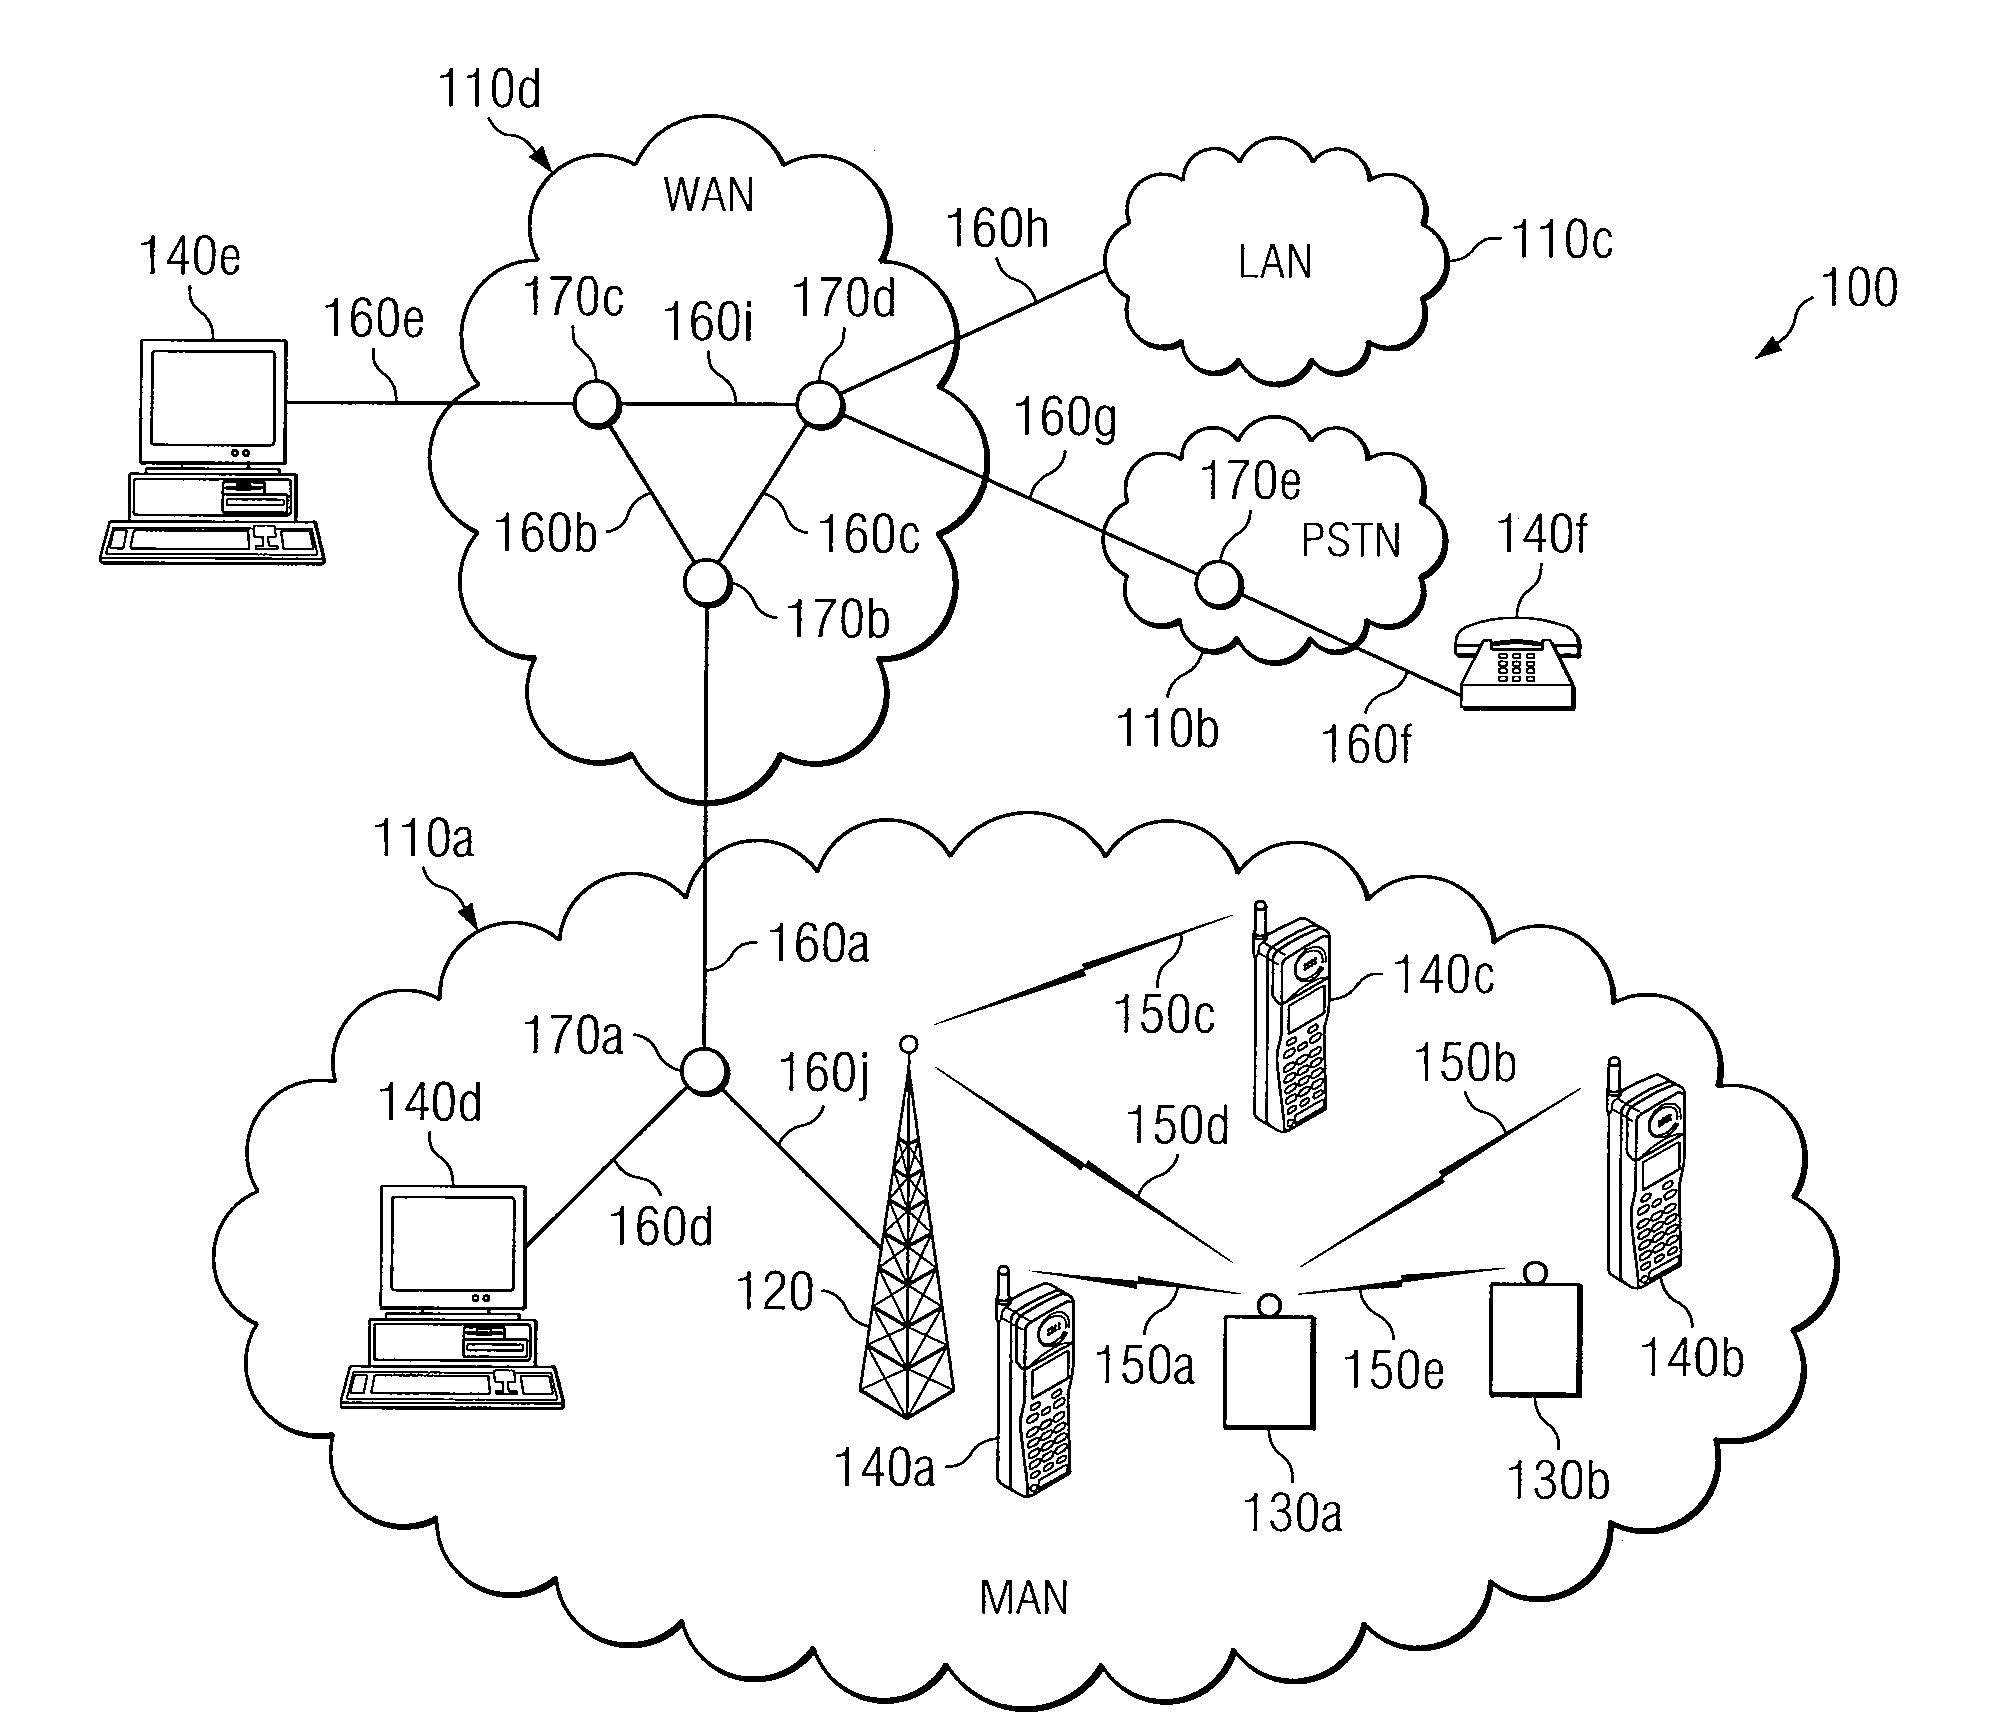 System and Method for Adjusting Connection Parameters in a Wireless Network